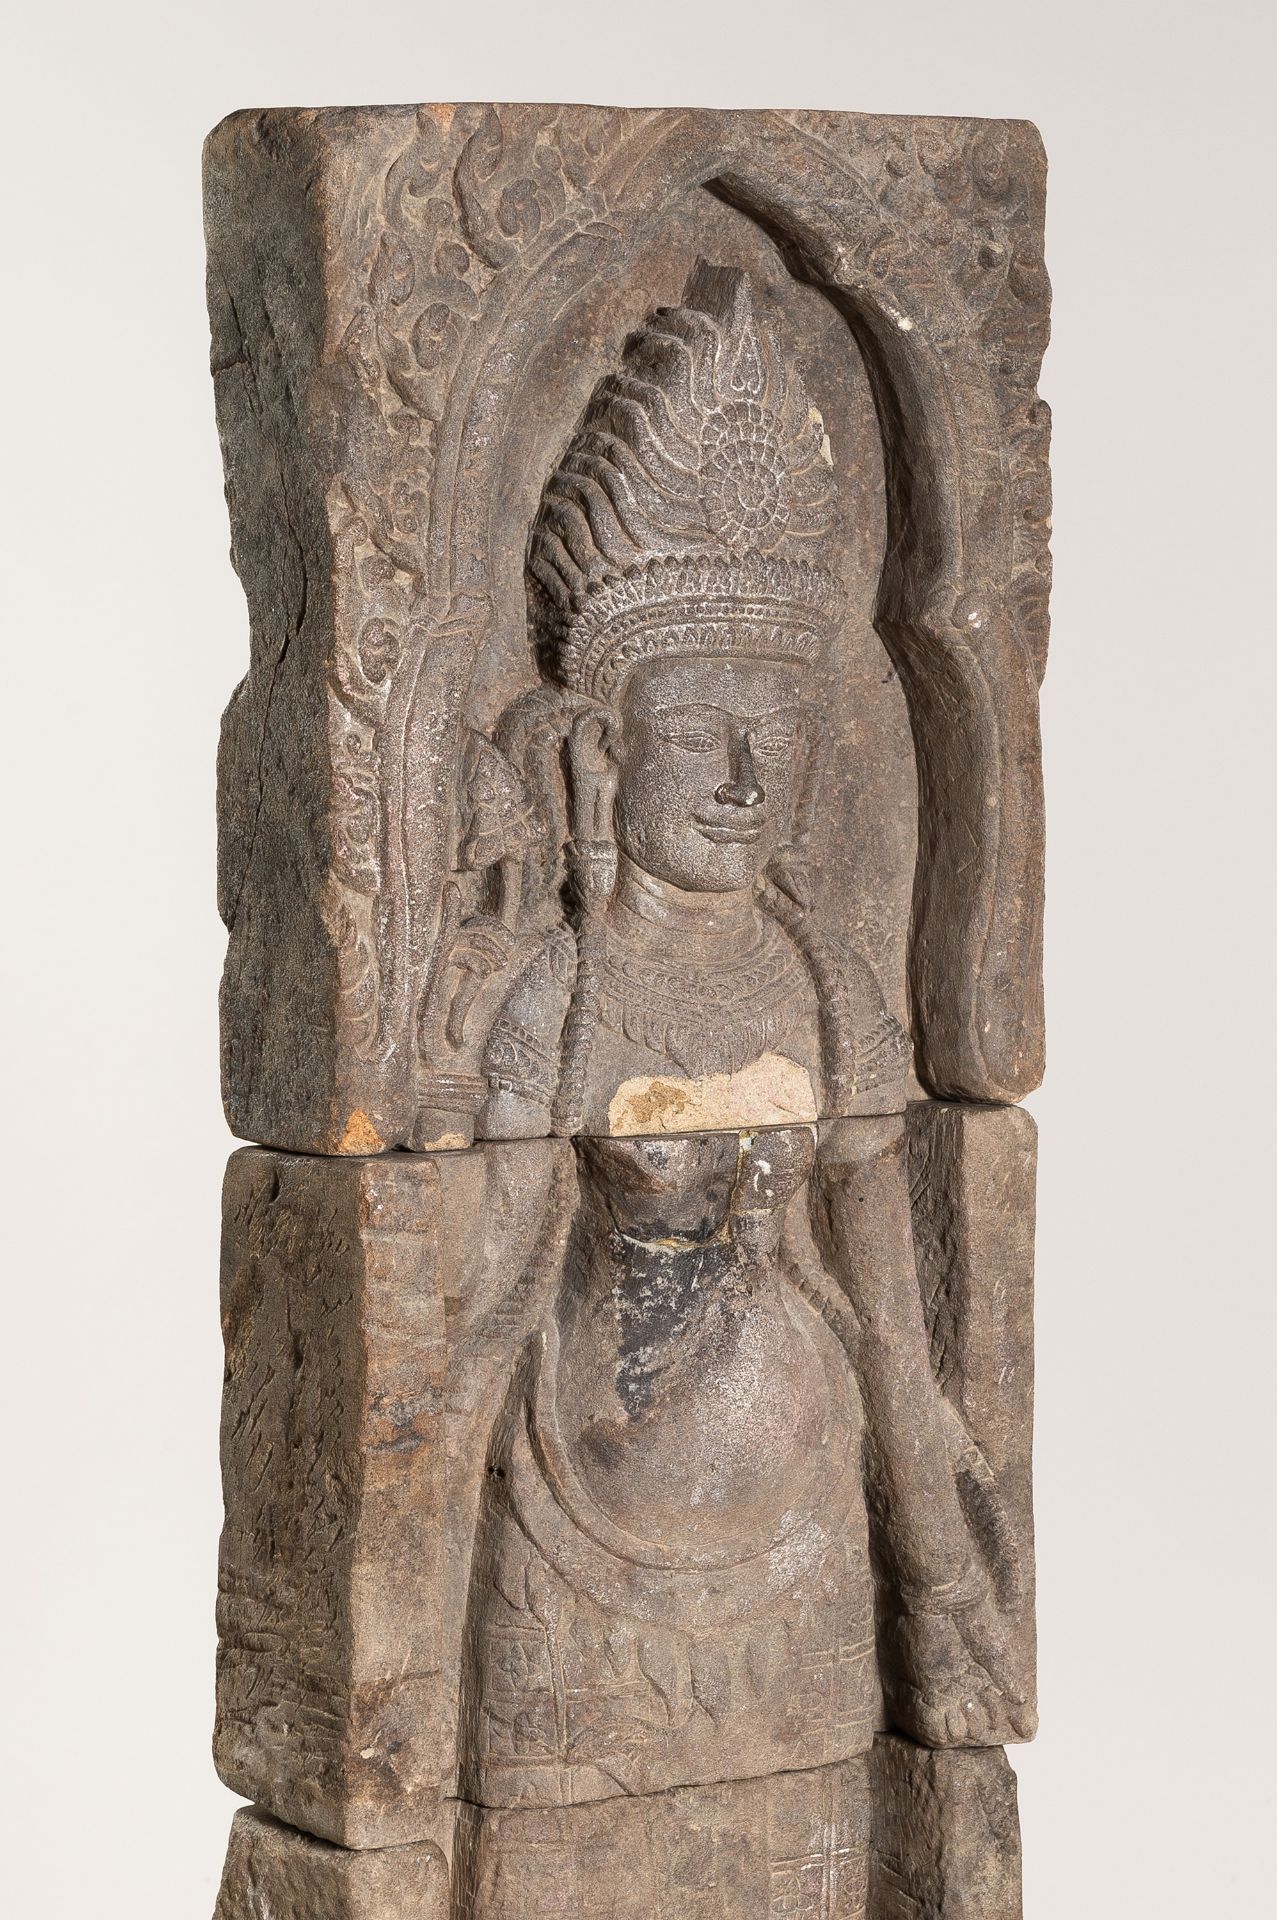 A VERY LARGE KHMER-STYLE SANDSTONE FIGURE OF AN APSARA, c. 1920s - Image 5 of 15